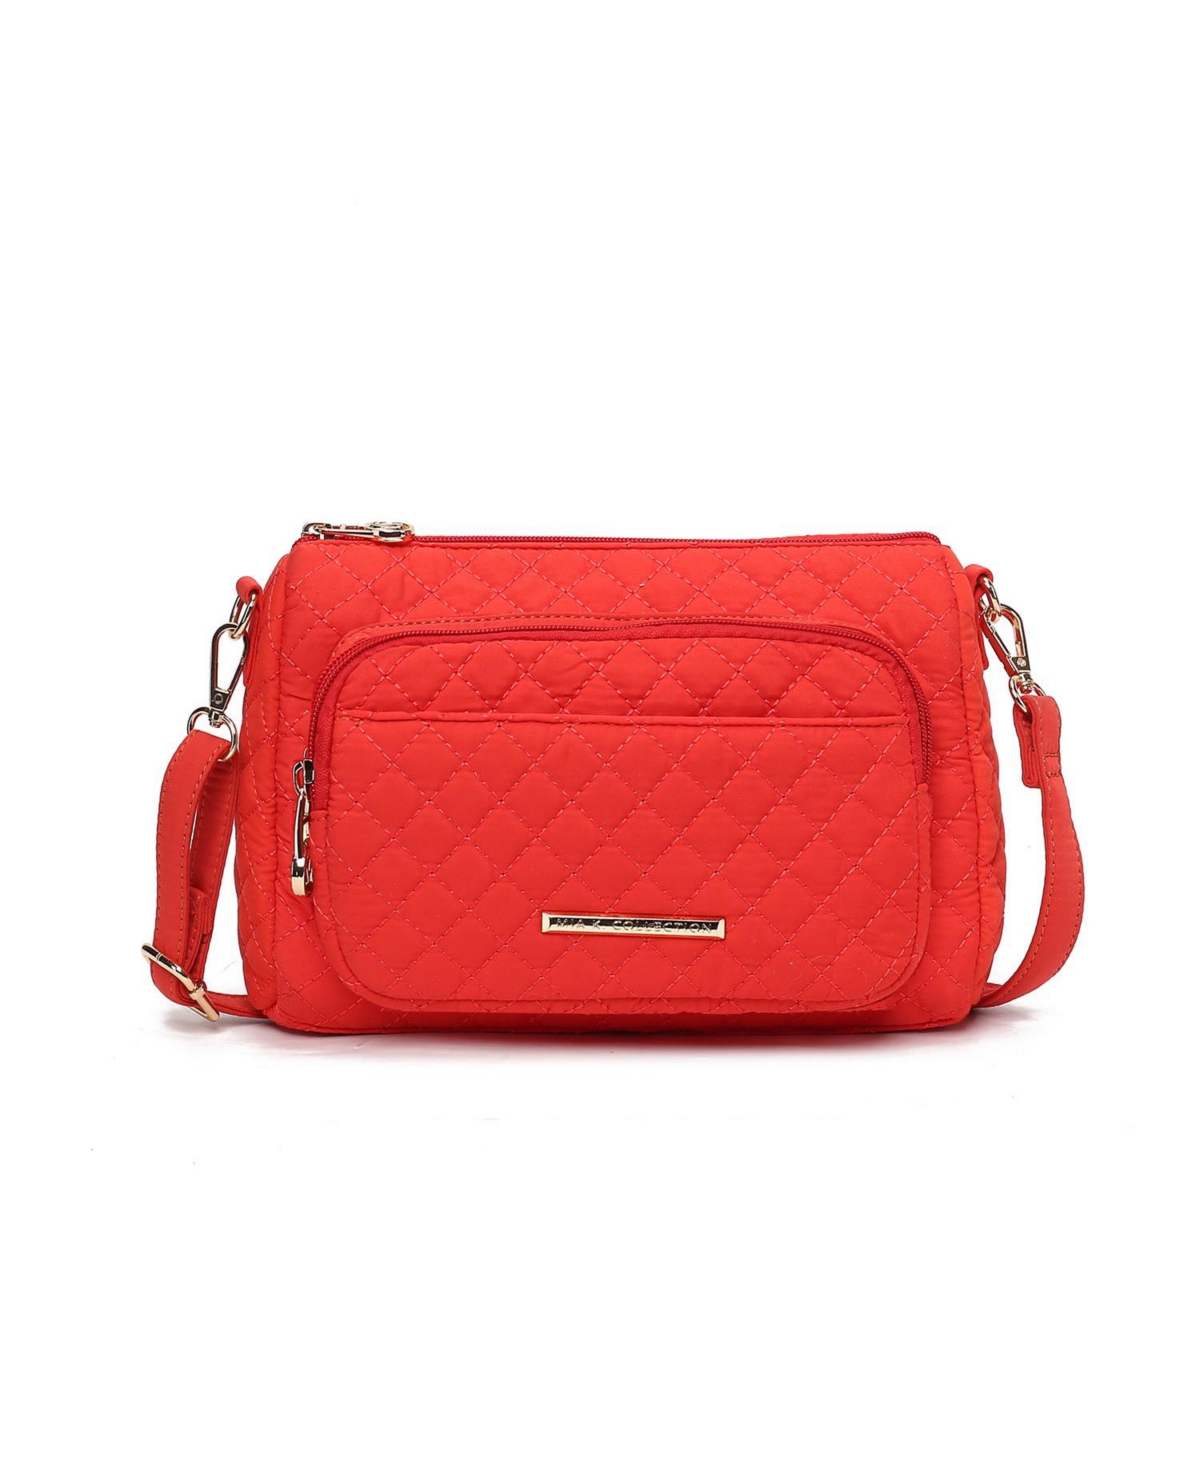 Rosalie Solid Quilted Cotton Women s Shoulder Bag by Mia K - Red